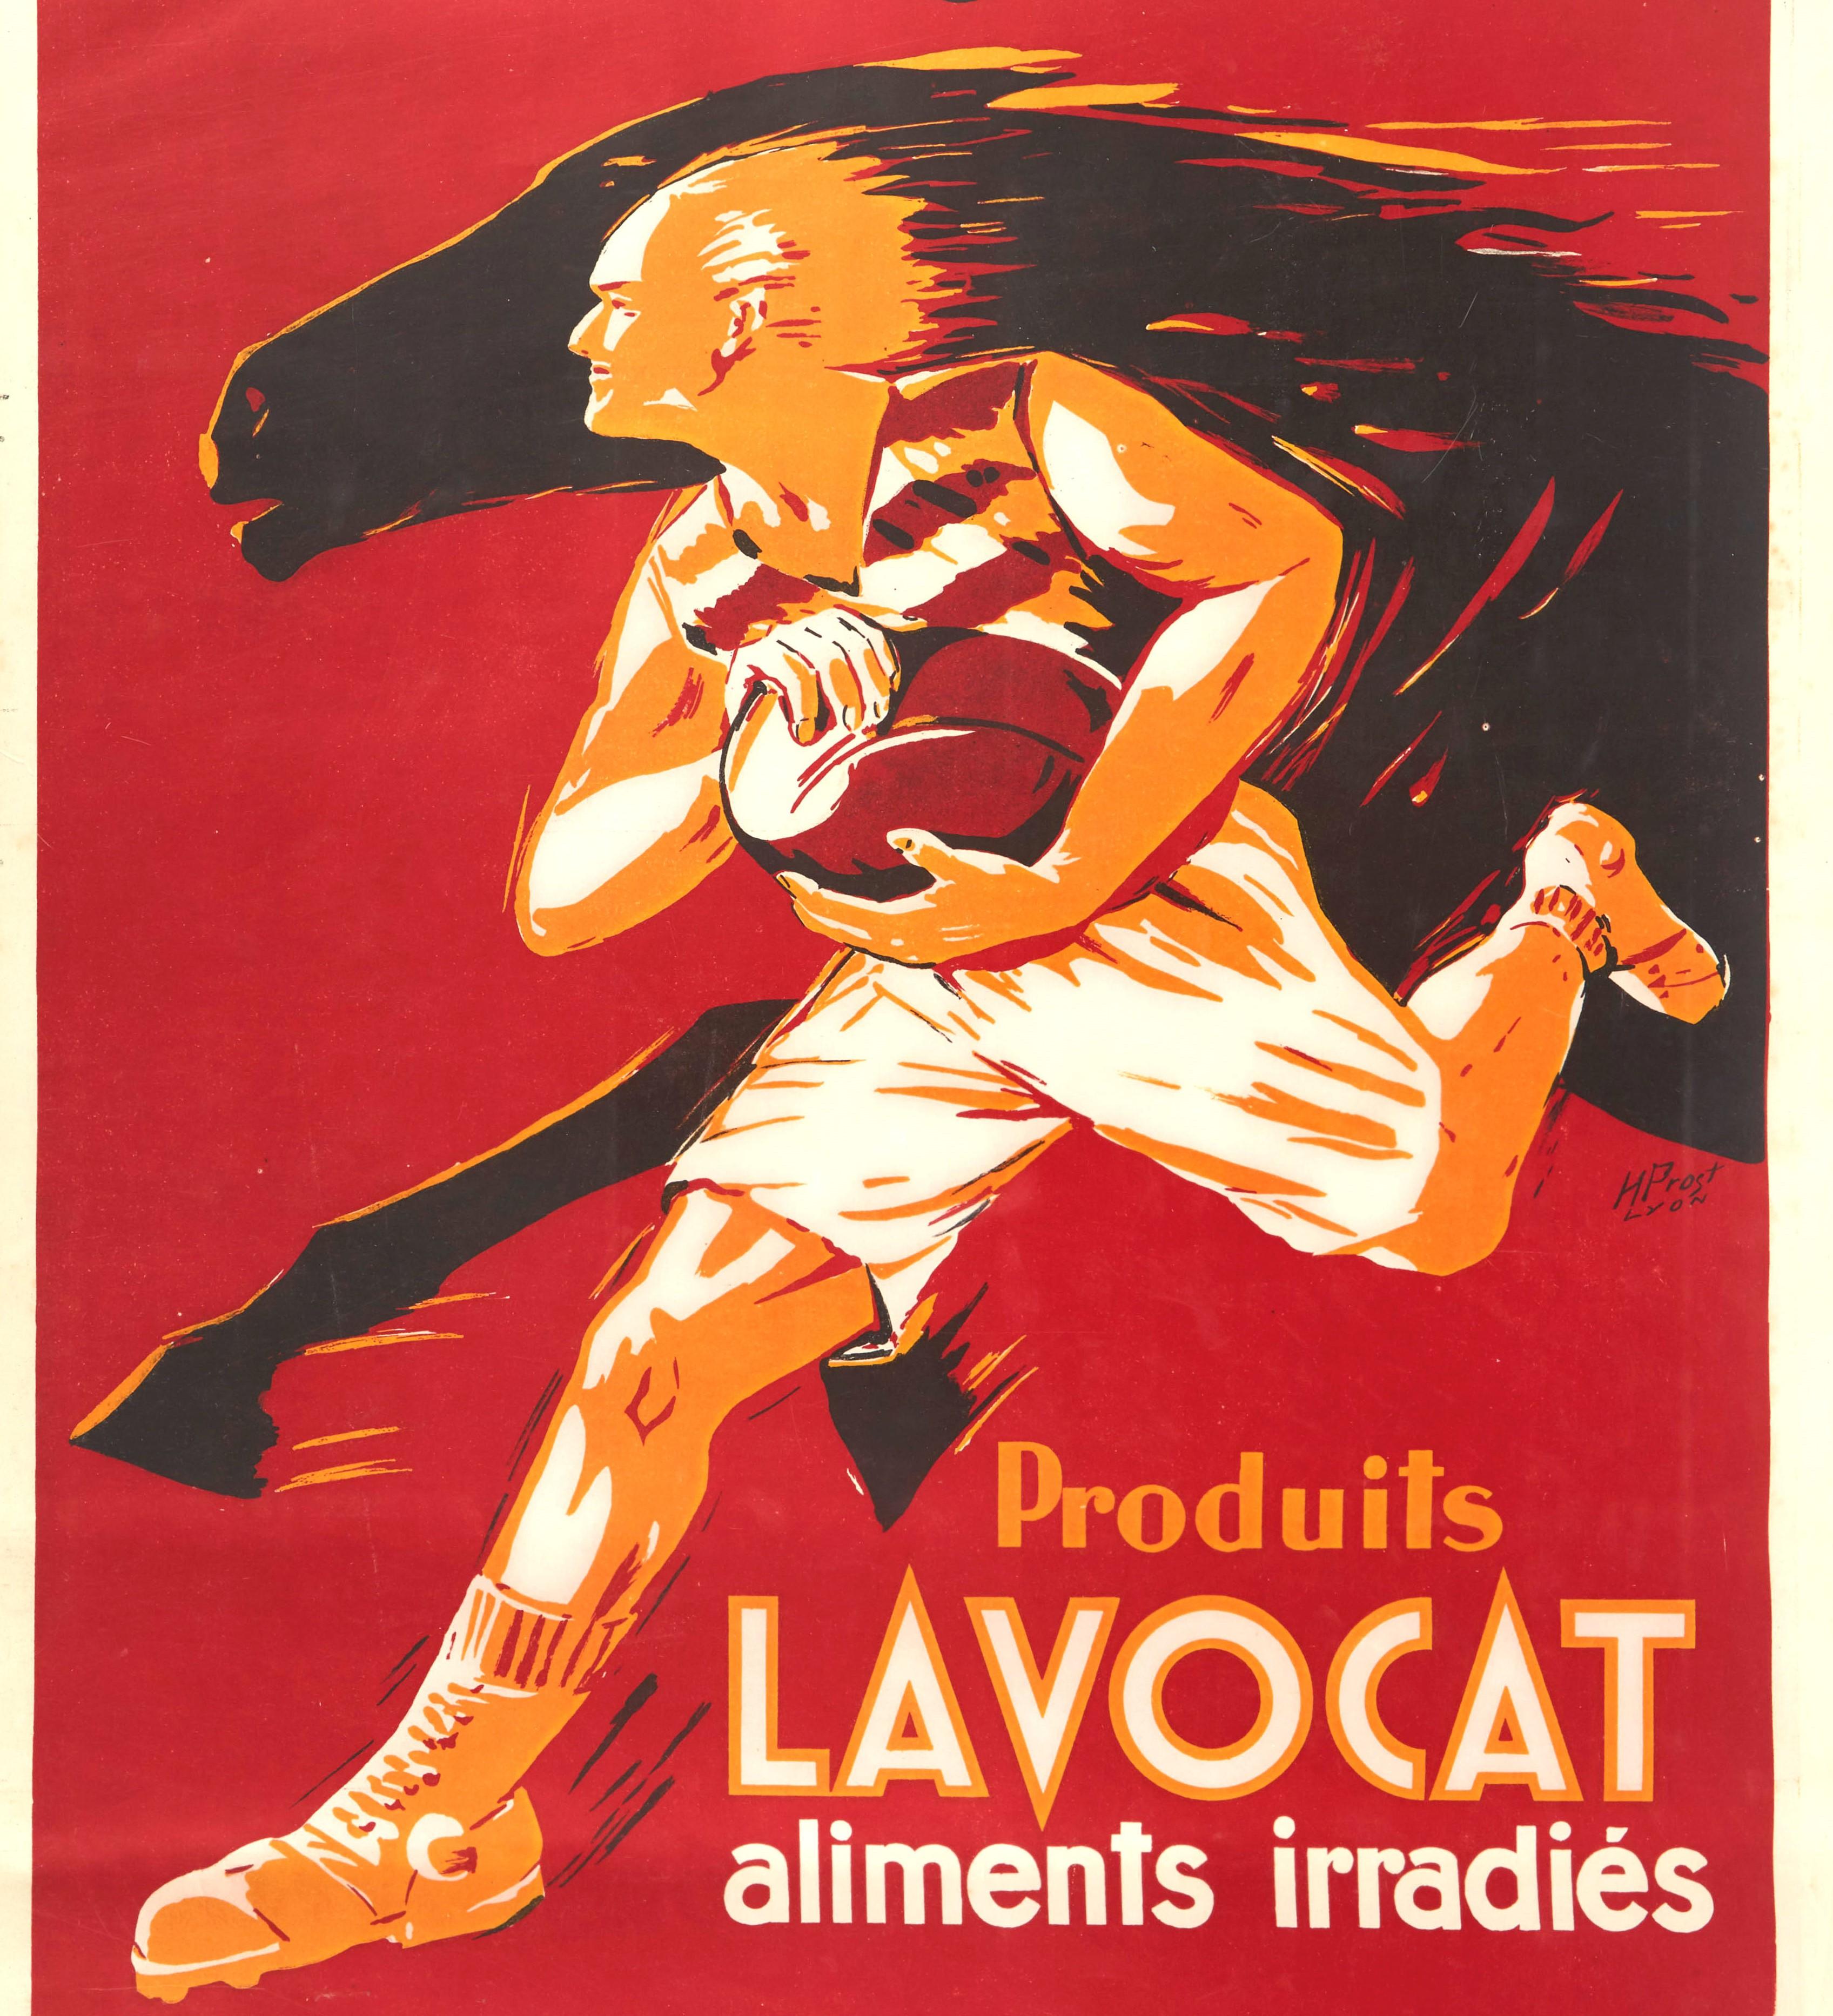 Original vintage sport themed advertising poster - Strength, Energy by Lavocat Products irradiated food / Force, Energie par les Produits Lavocat aliments irradies - featuring dynamic artwork depicting a man running at speed with a rugby ball